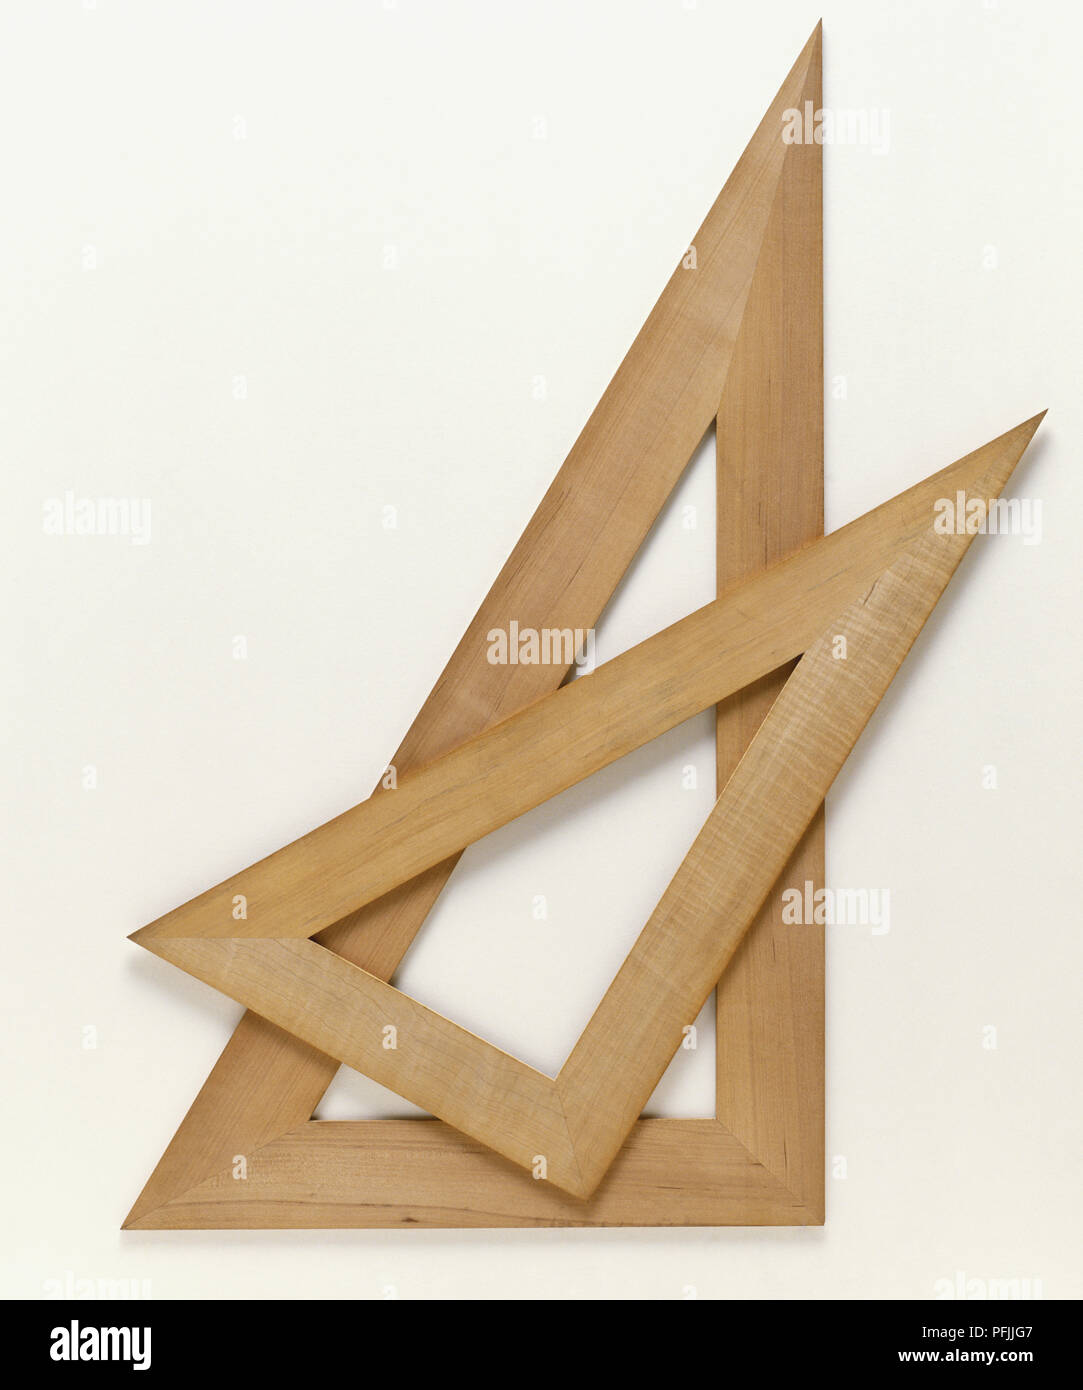 Pair of wooden set squares Stock Photo